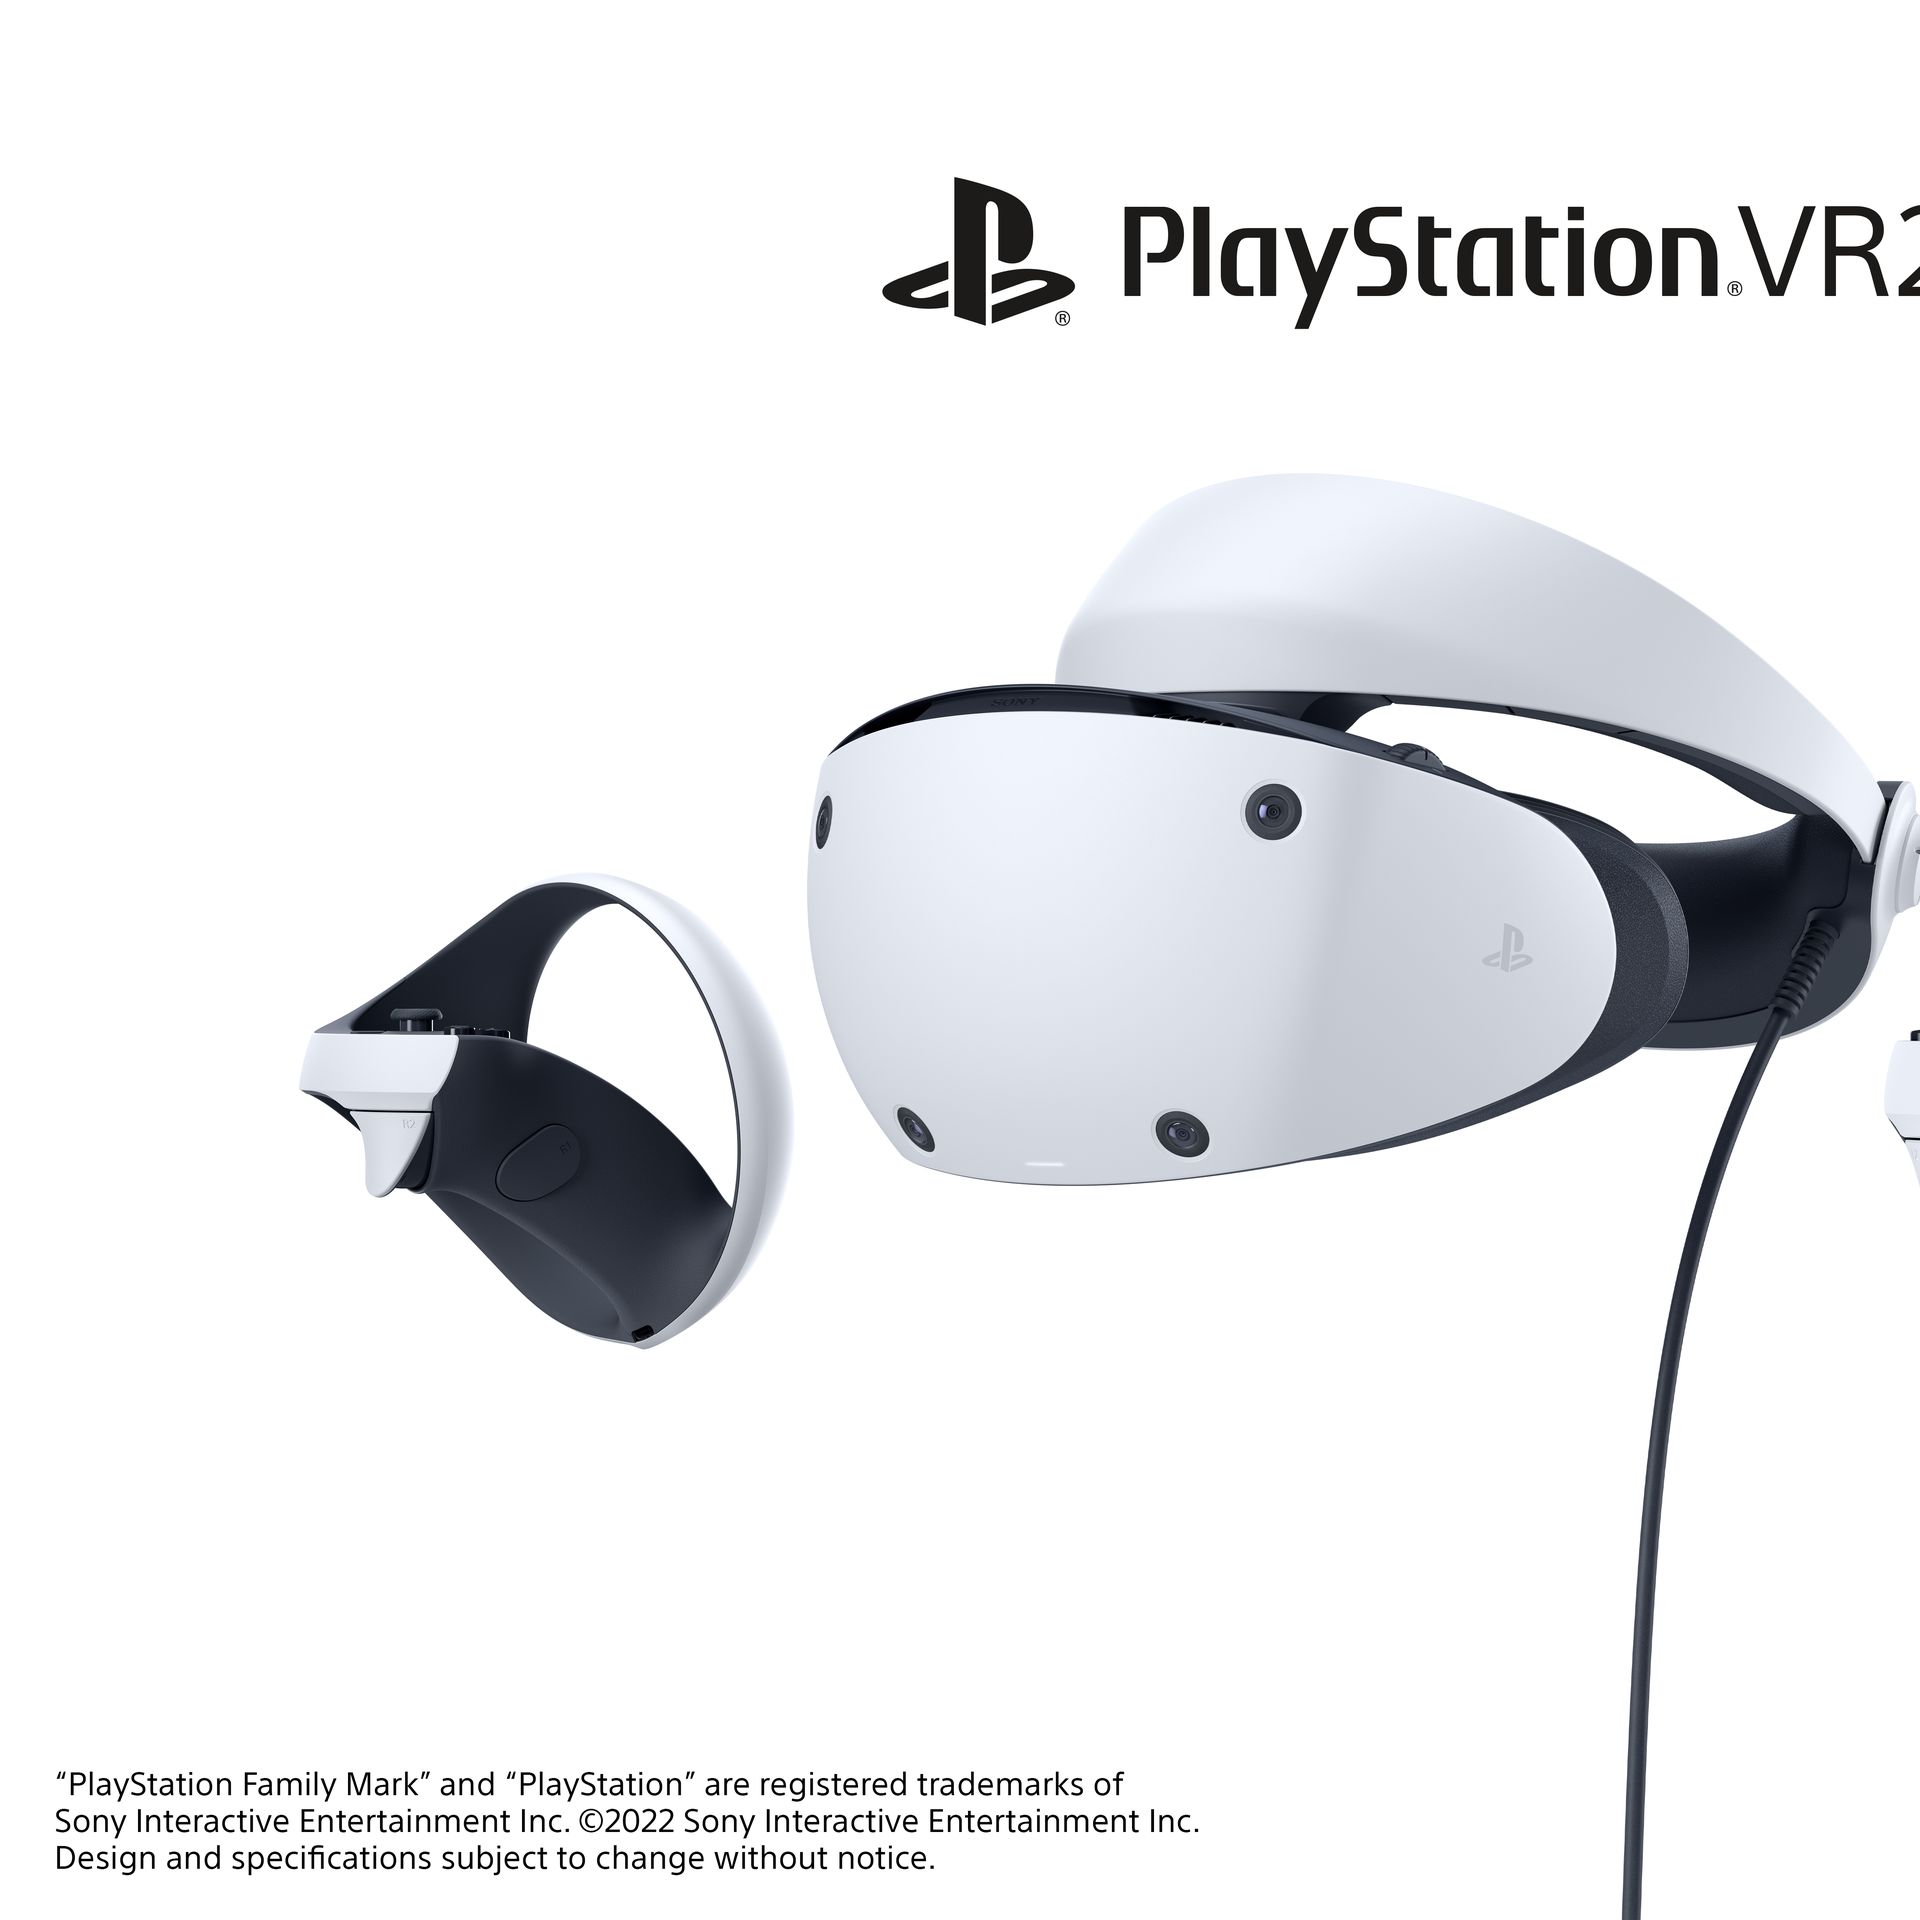 Sony PS VR2 launched: Check details